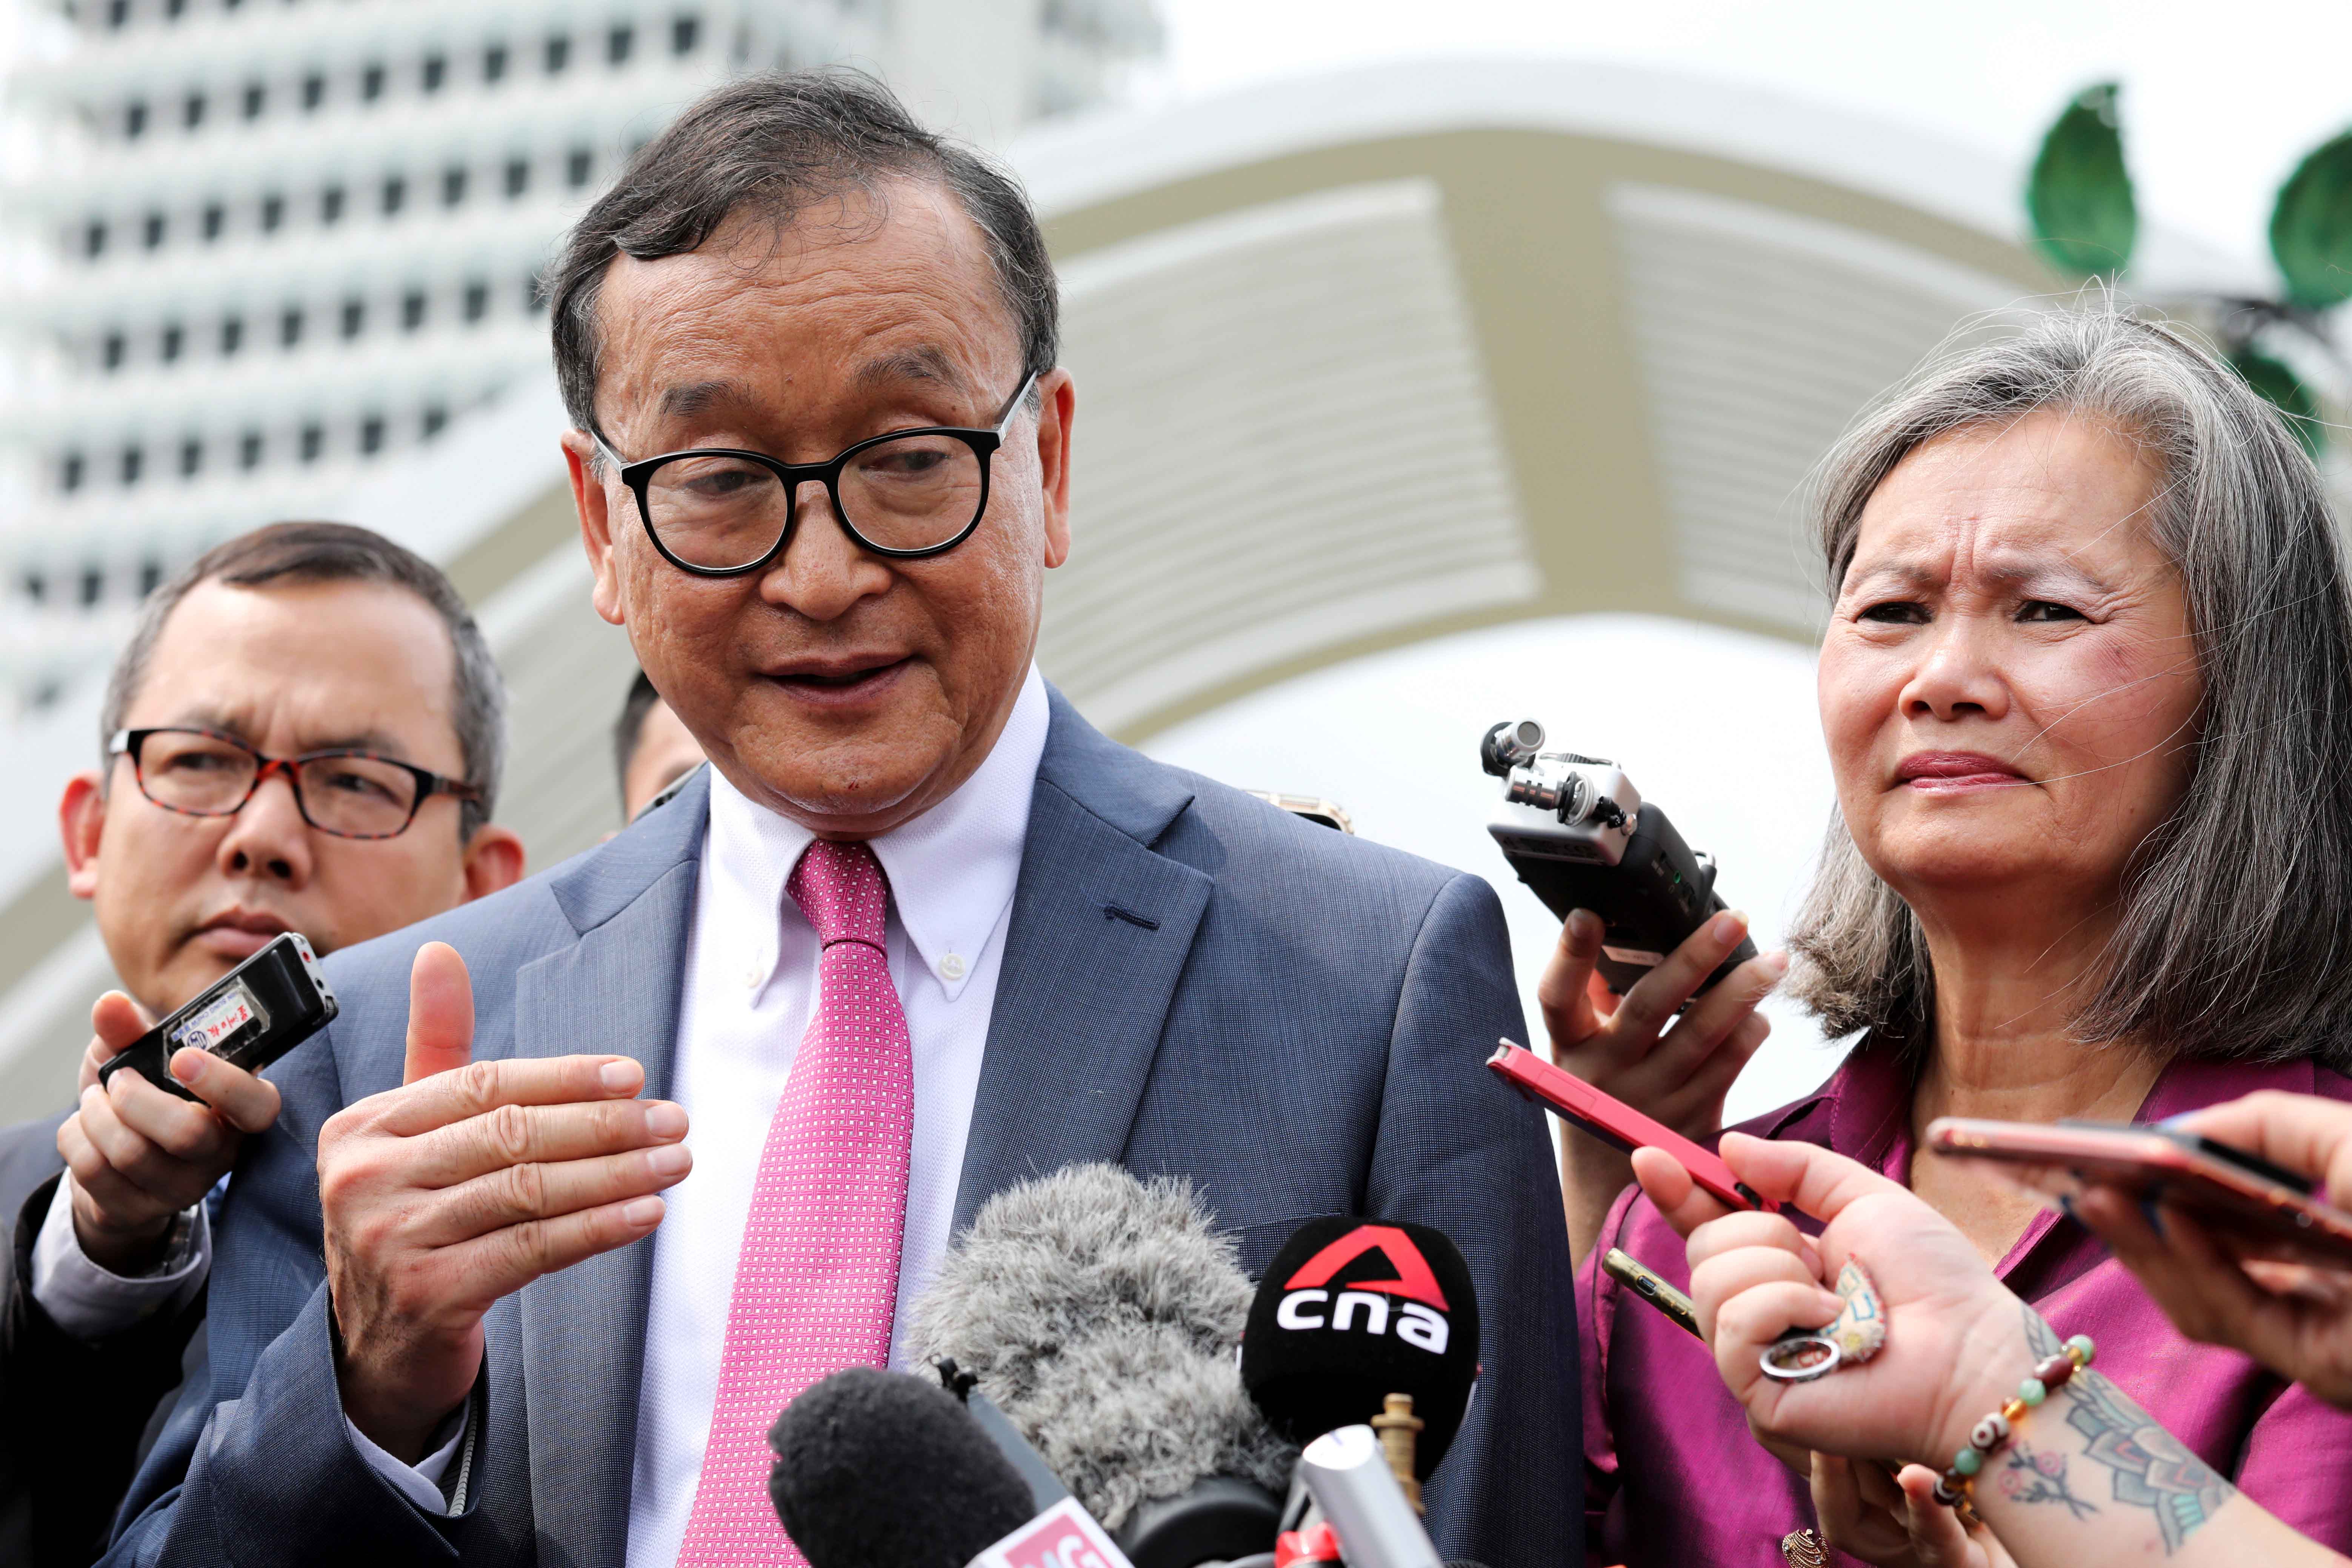 Self-exiled Cambodian opposition party founder Sam Rainsy (L) and Mu Sochua (R), deputy president of the Cambodia National Rescue Party (CNRP), speak to the media in Kuala Lumpur, Malaysia, November 12, 2019.